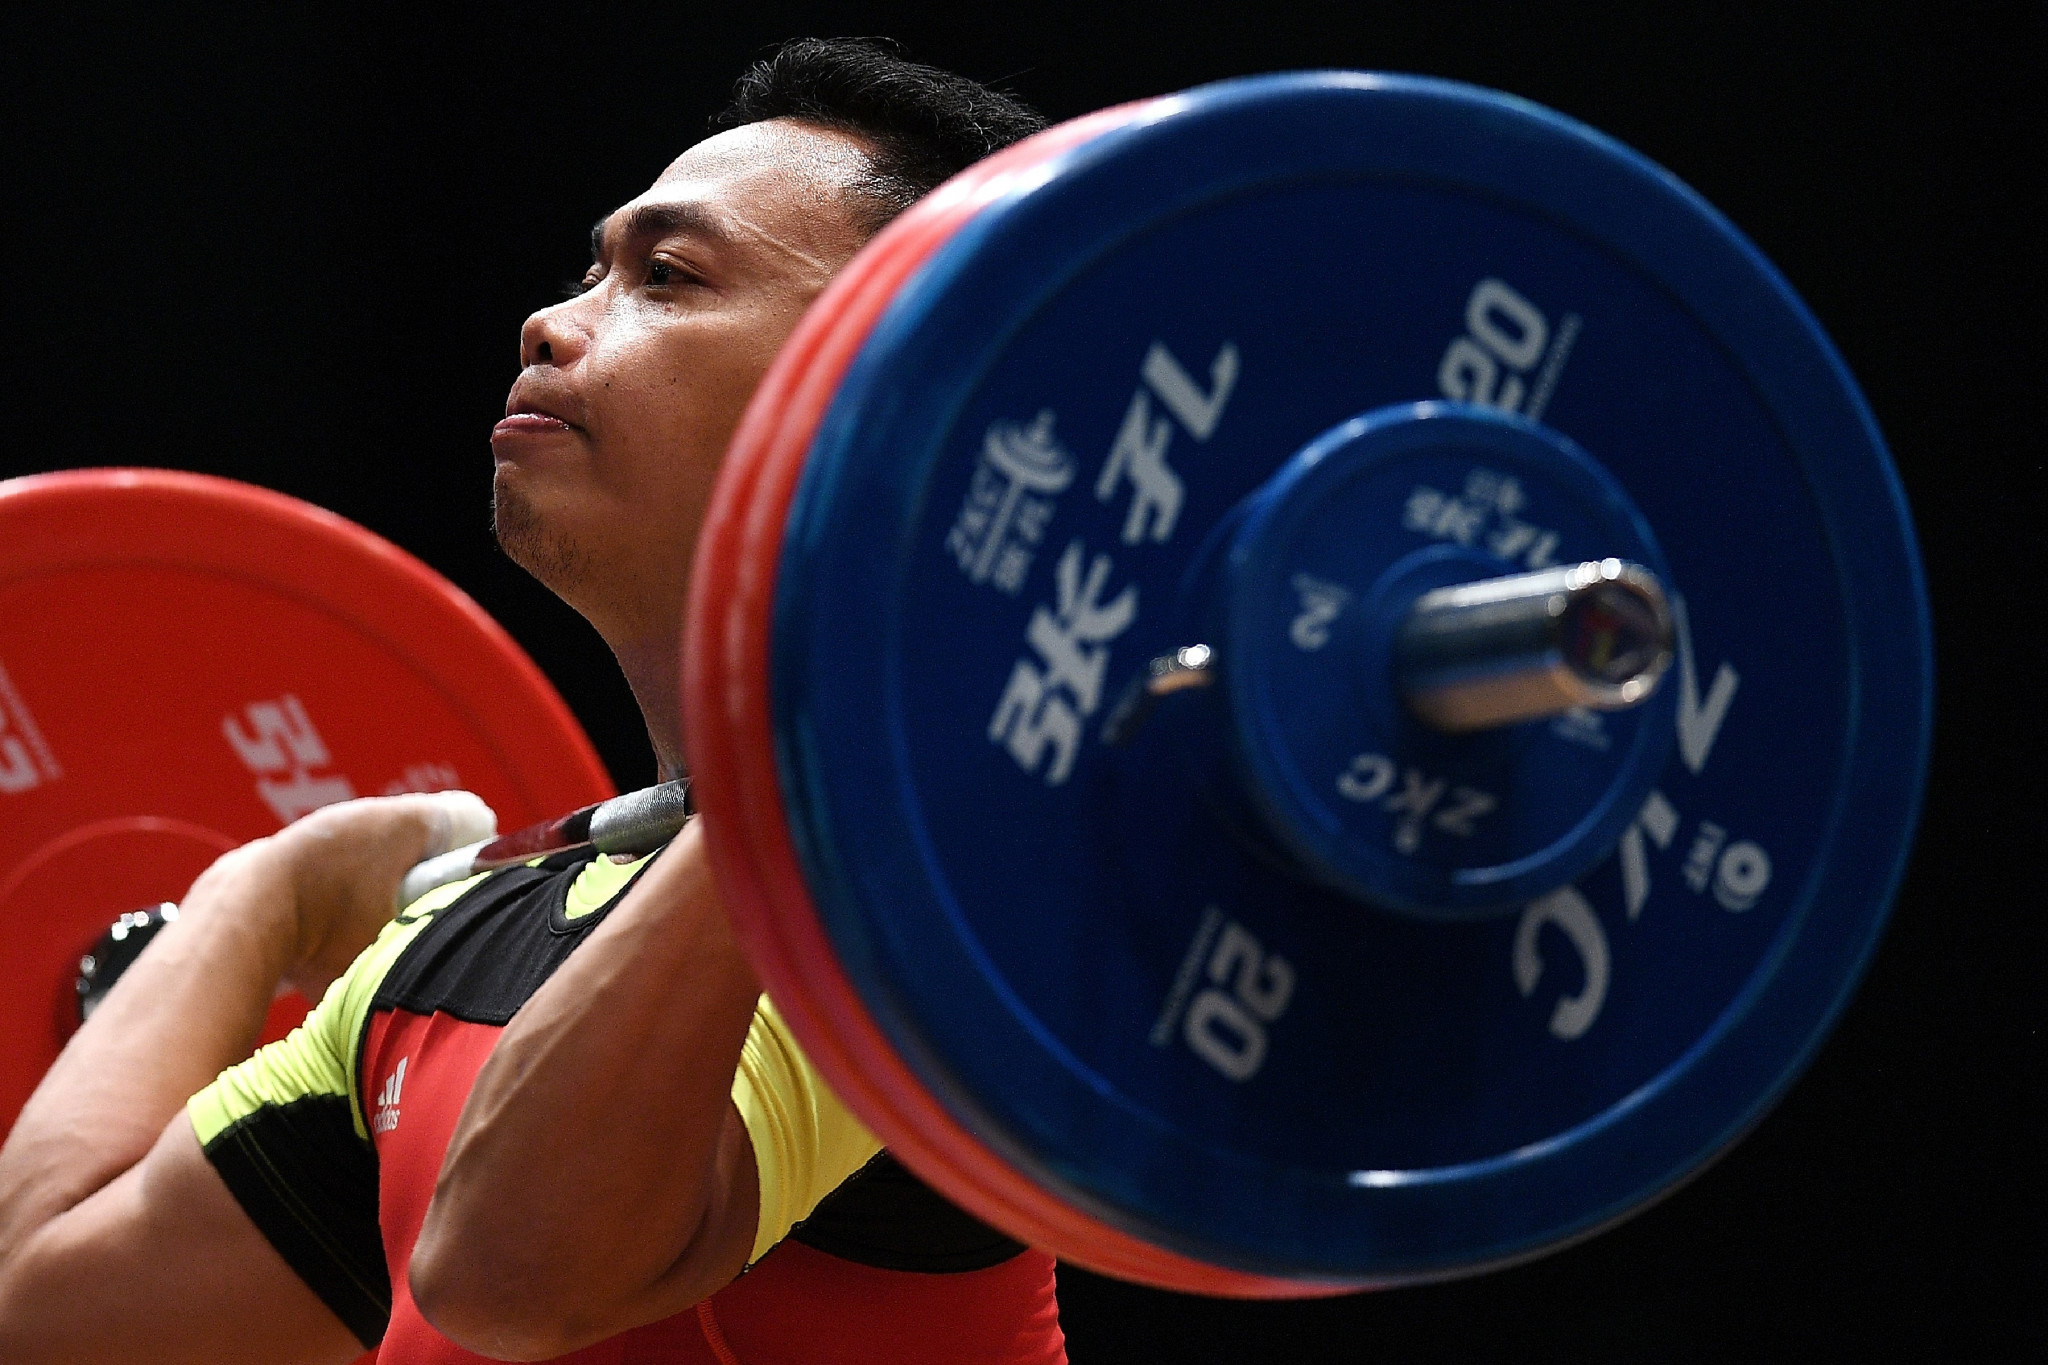 Eko Yuli Irawan has been a regular source of medals for Indonesia at major events ©Getty Images